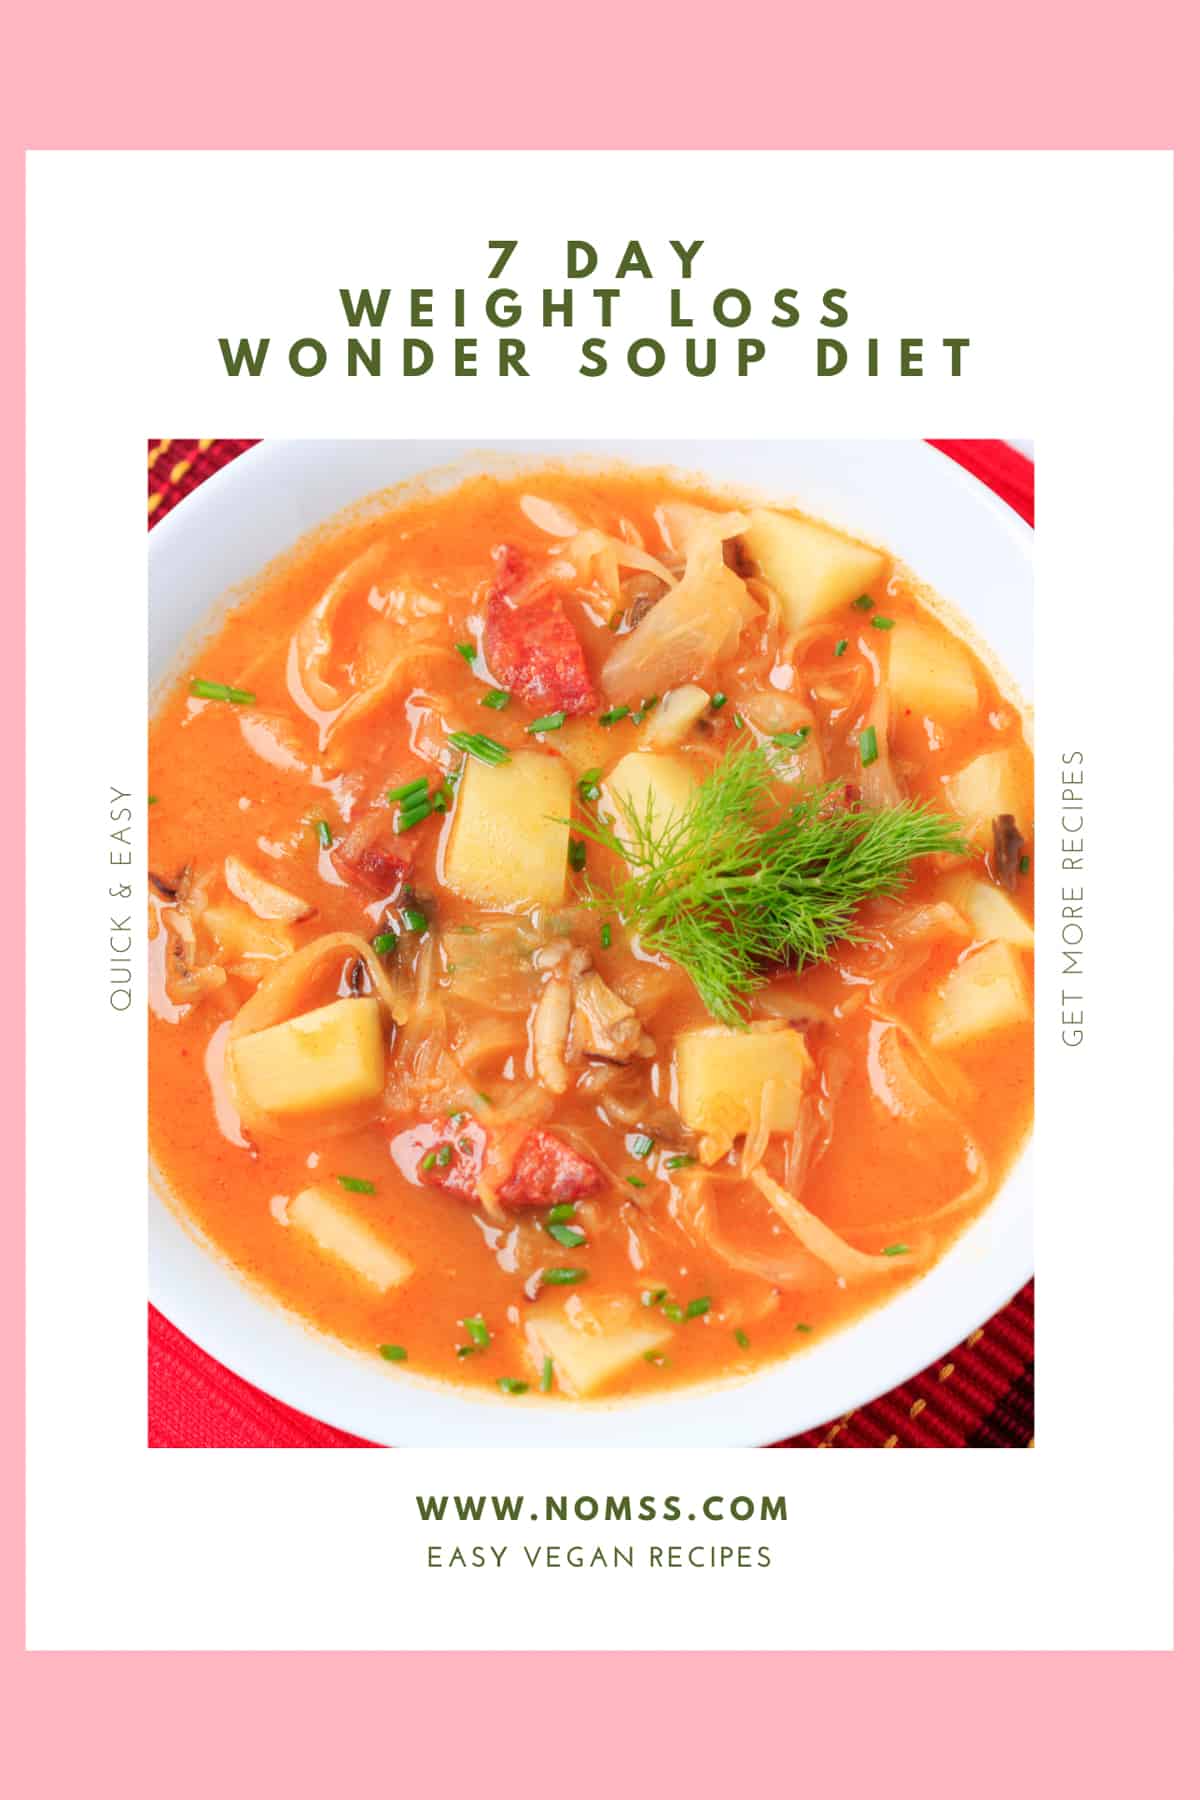 https://www.nomss.com/wp-content/uploads/2023/12/7-DAY-WEIGHT-LOSS-WONDER-SOUP-NOMSS-1.jpg